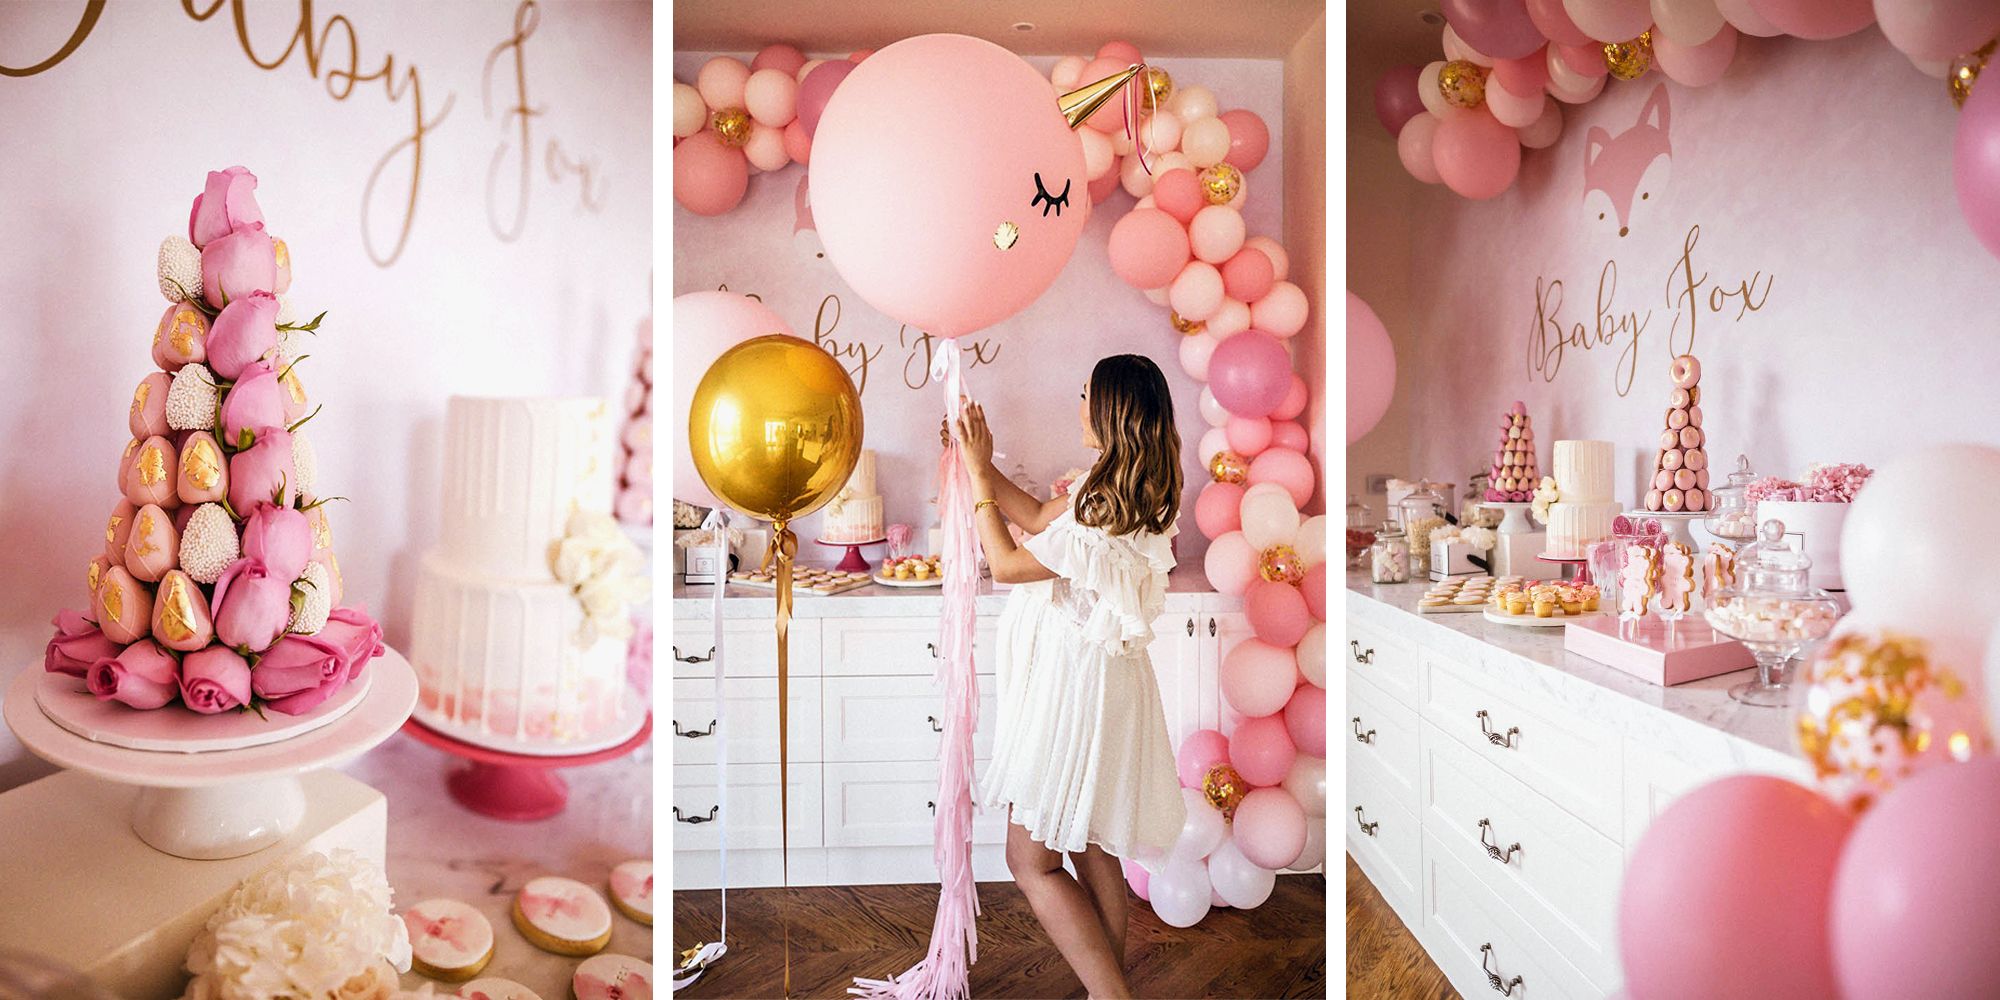 7 Best Baby Shower Ideas For 2018 - Trendy Baby Shower Decorations & Themes